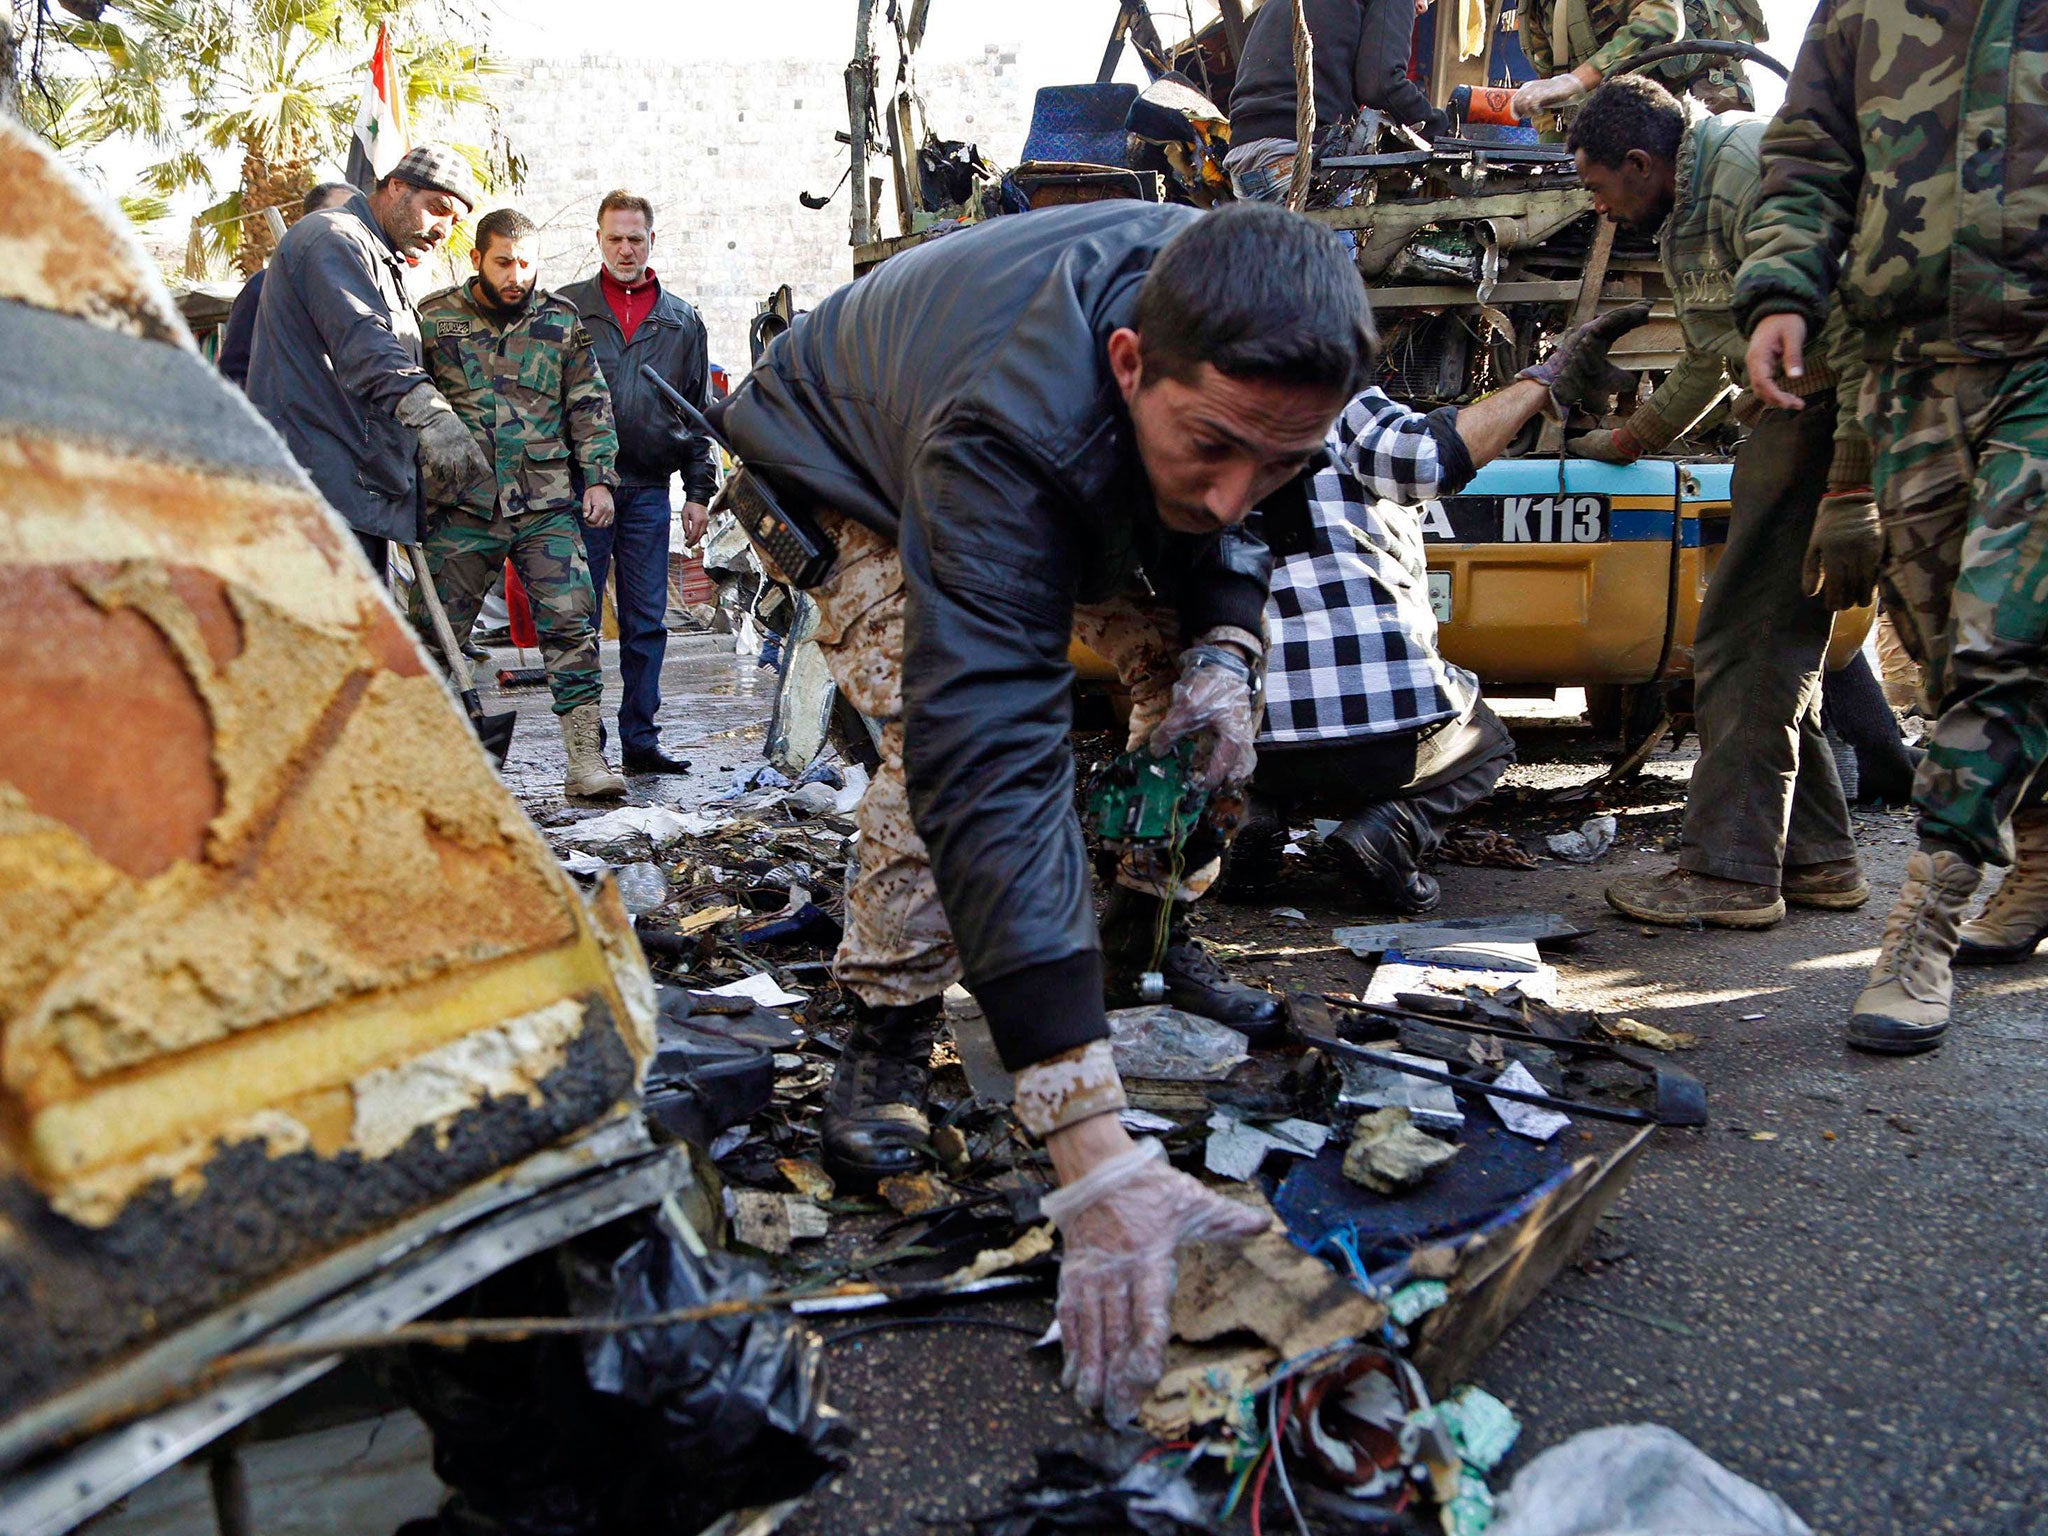 A Syrian soldier gathers evidence after an explosion occurred on a bus in central Damascus